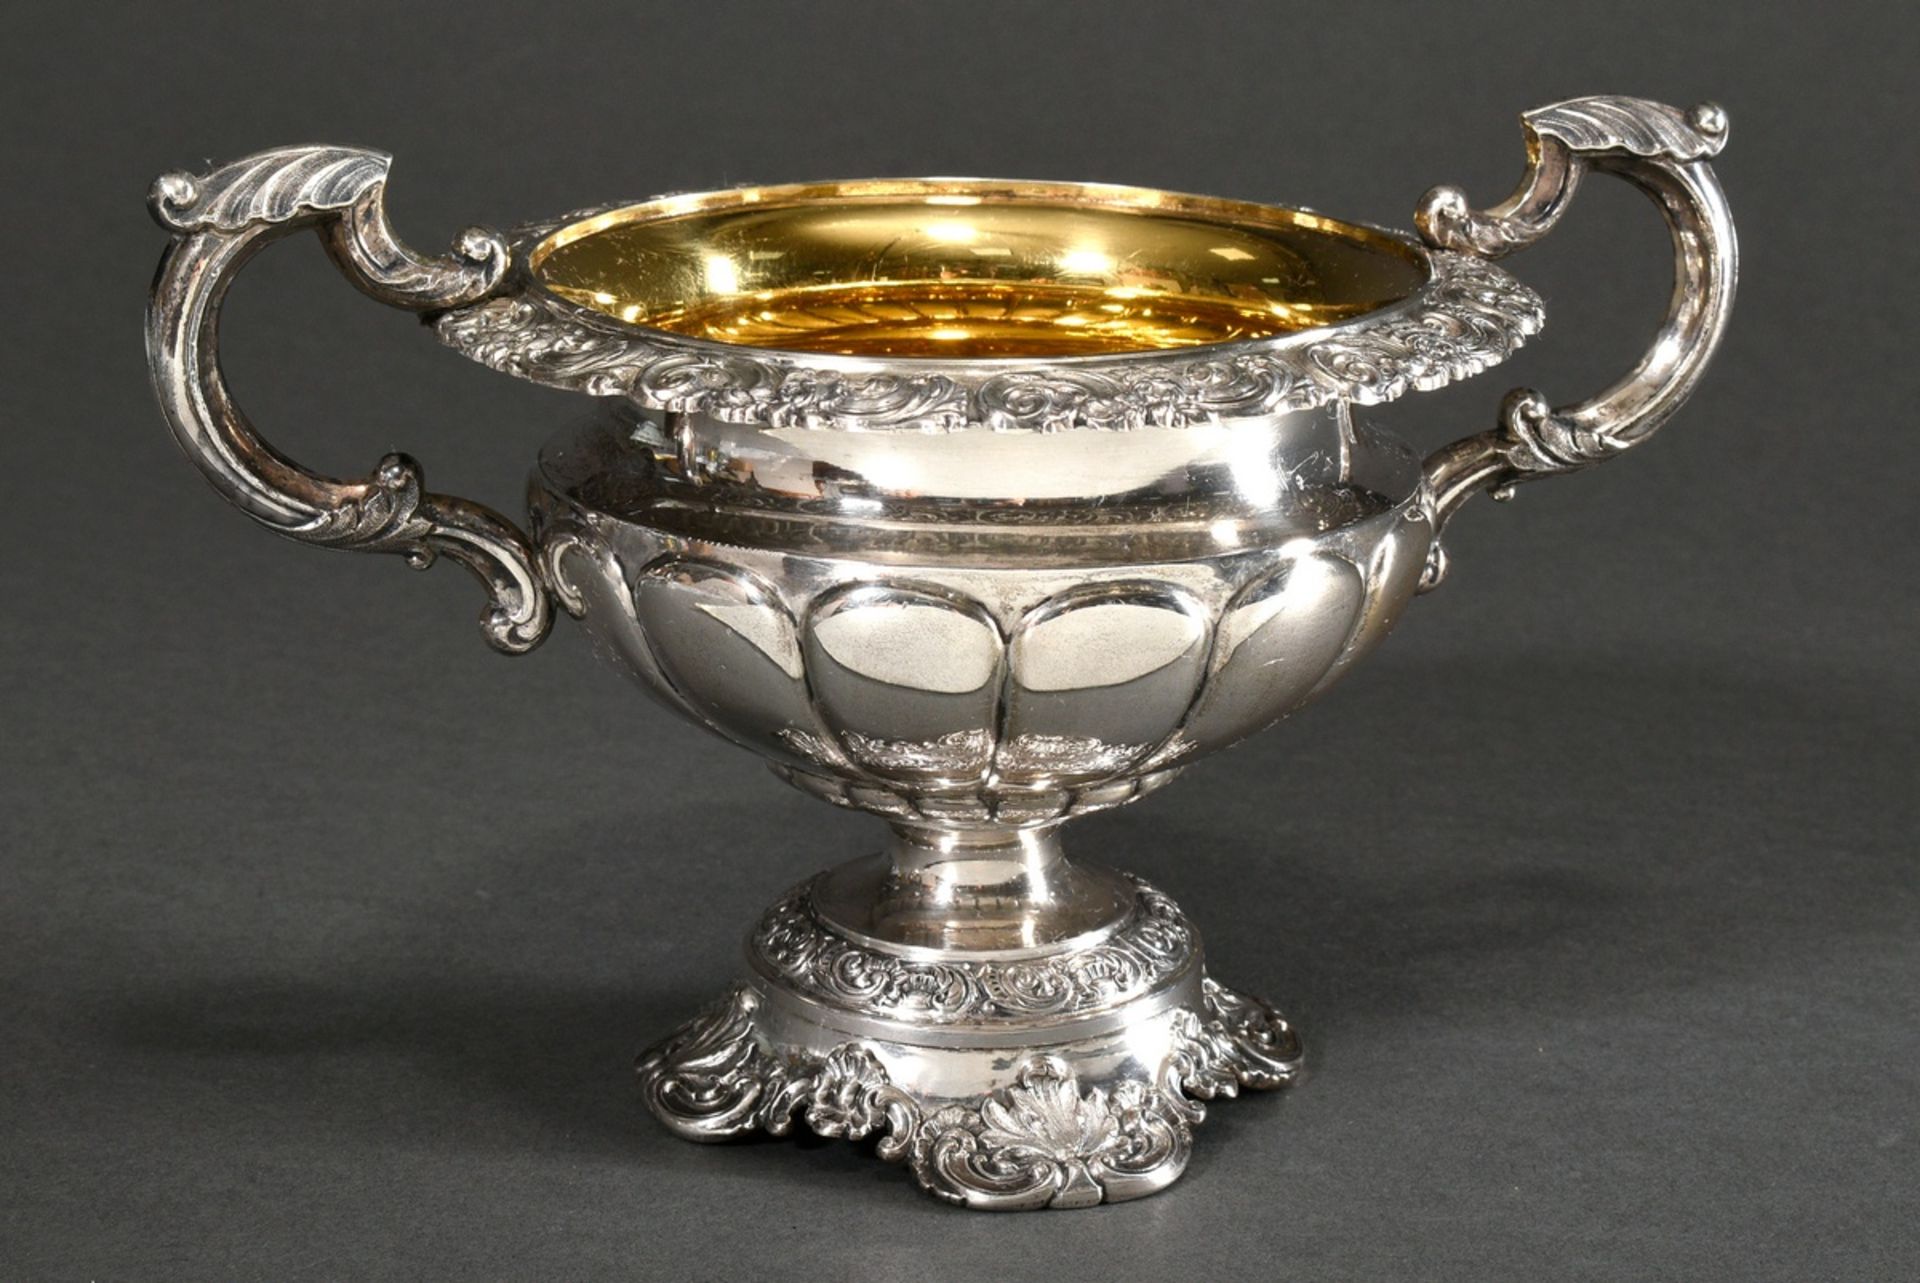 Biedermeier sugar centerpiece in crater shape with floral relief on foot, rim and handles, silver 1